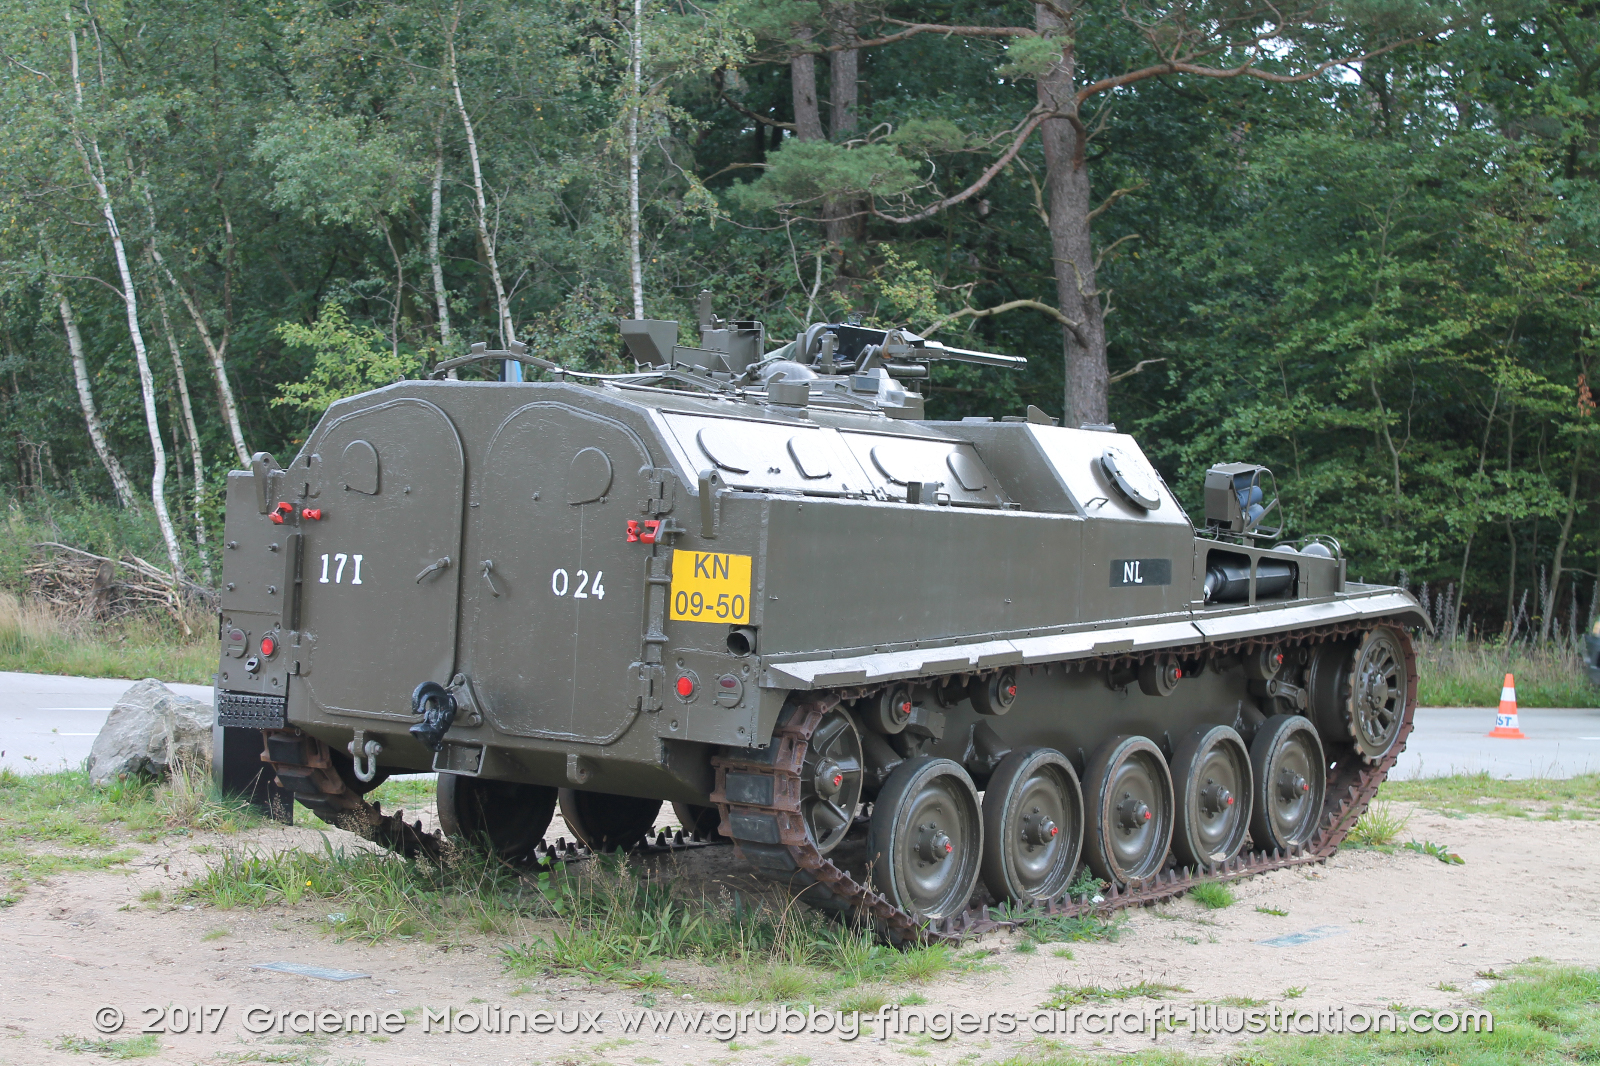 DAF%20YP-408%20APC%20KN%2009-50%20Netherlands%20Military%20Museum%202015%2005%20Graeme%20Molineux